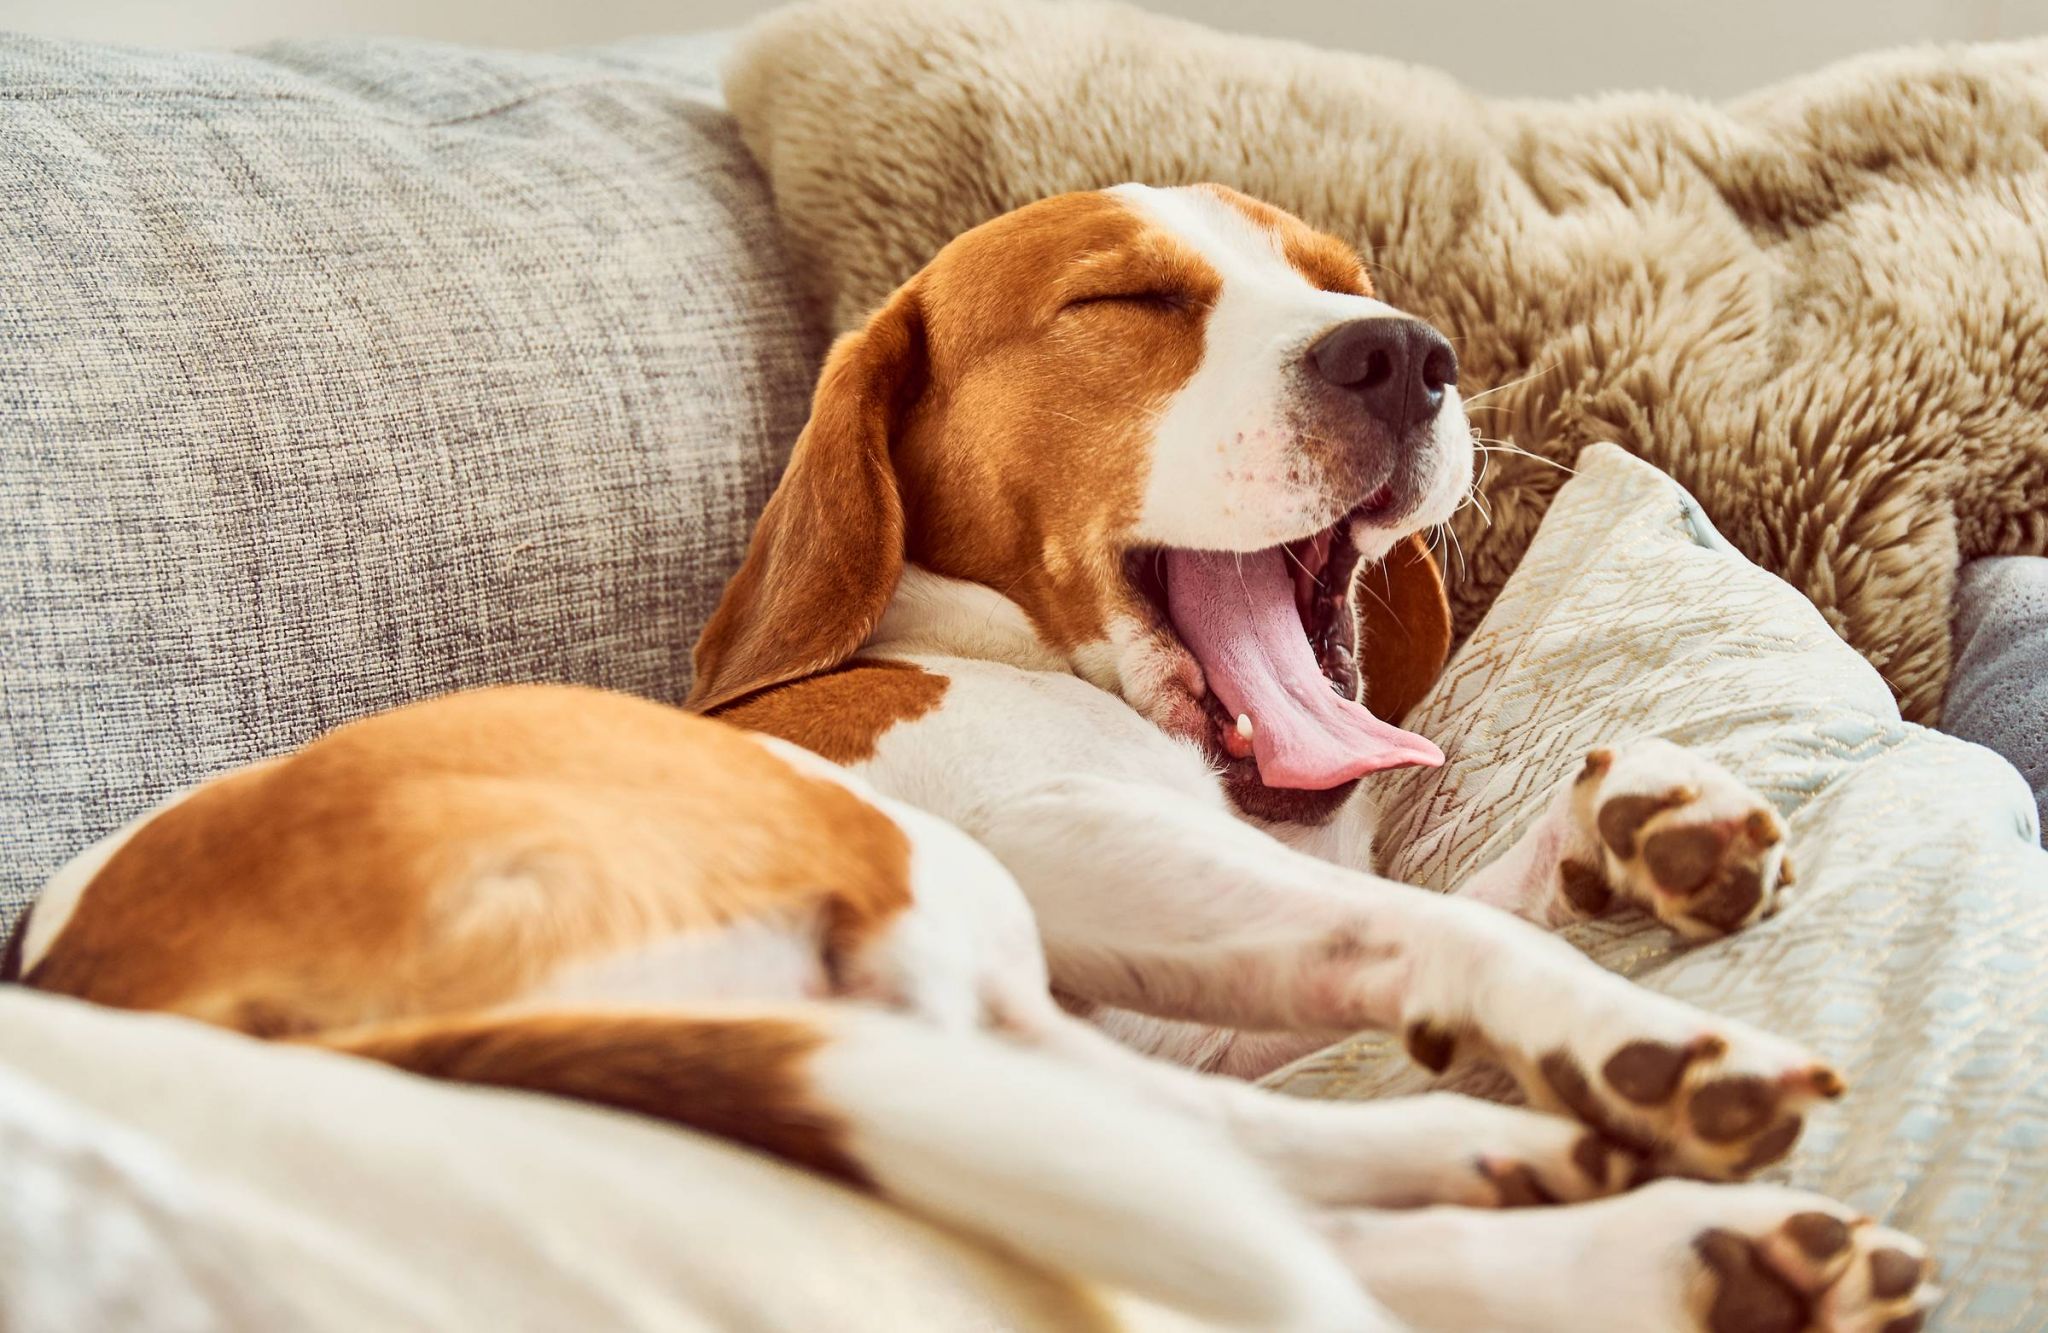 Tired beagle dog sleeping on couch and yawning